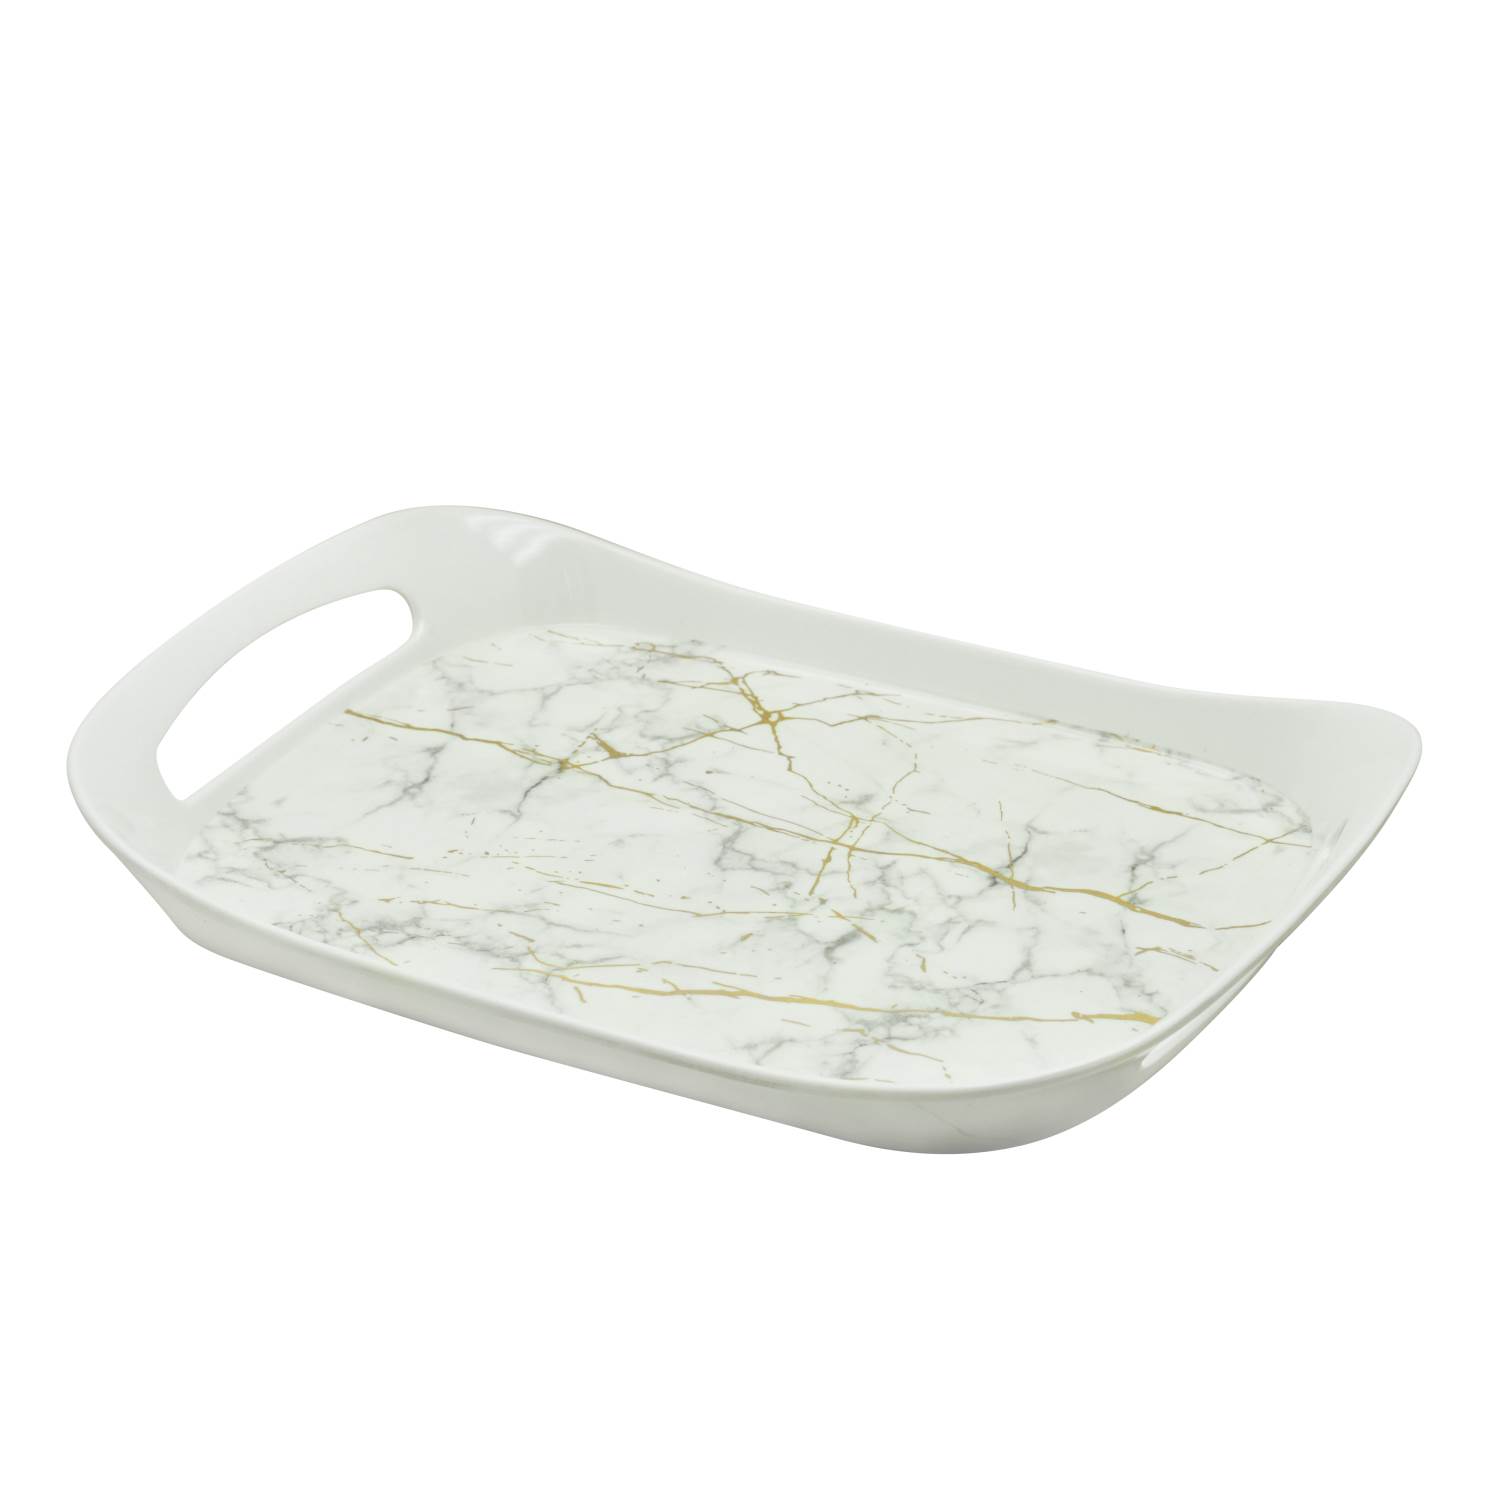 Rk Comfort Tray Large White Static Gold, Dwt1072Wsg, 16.25" X 10.25"